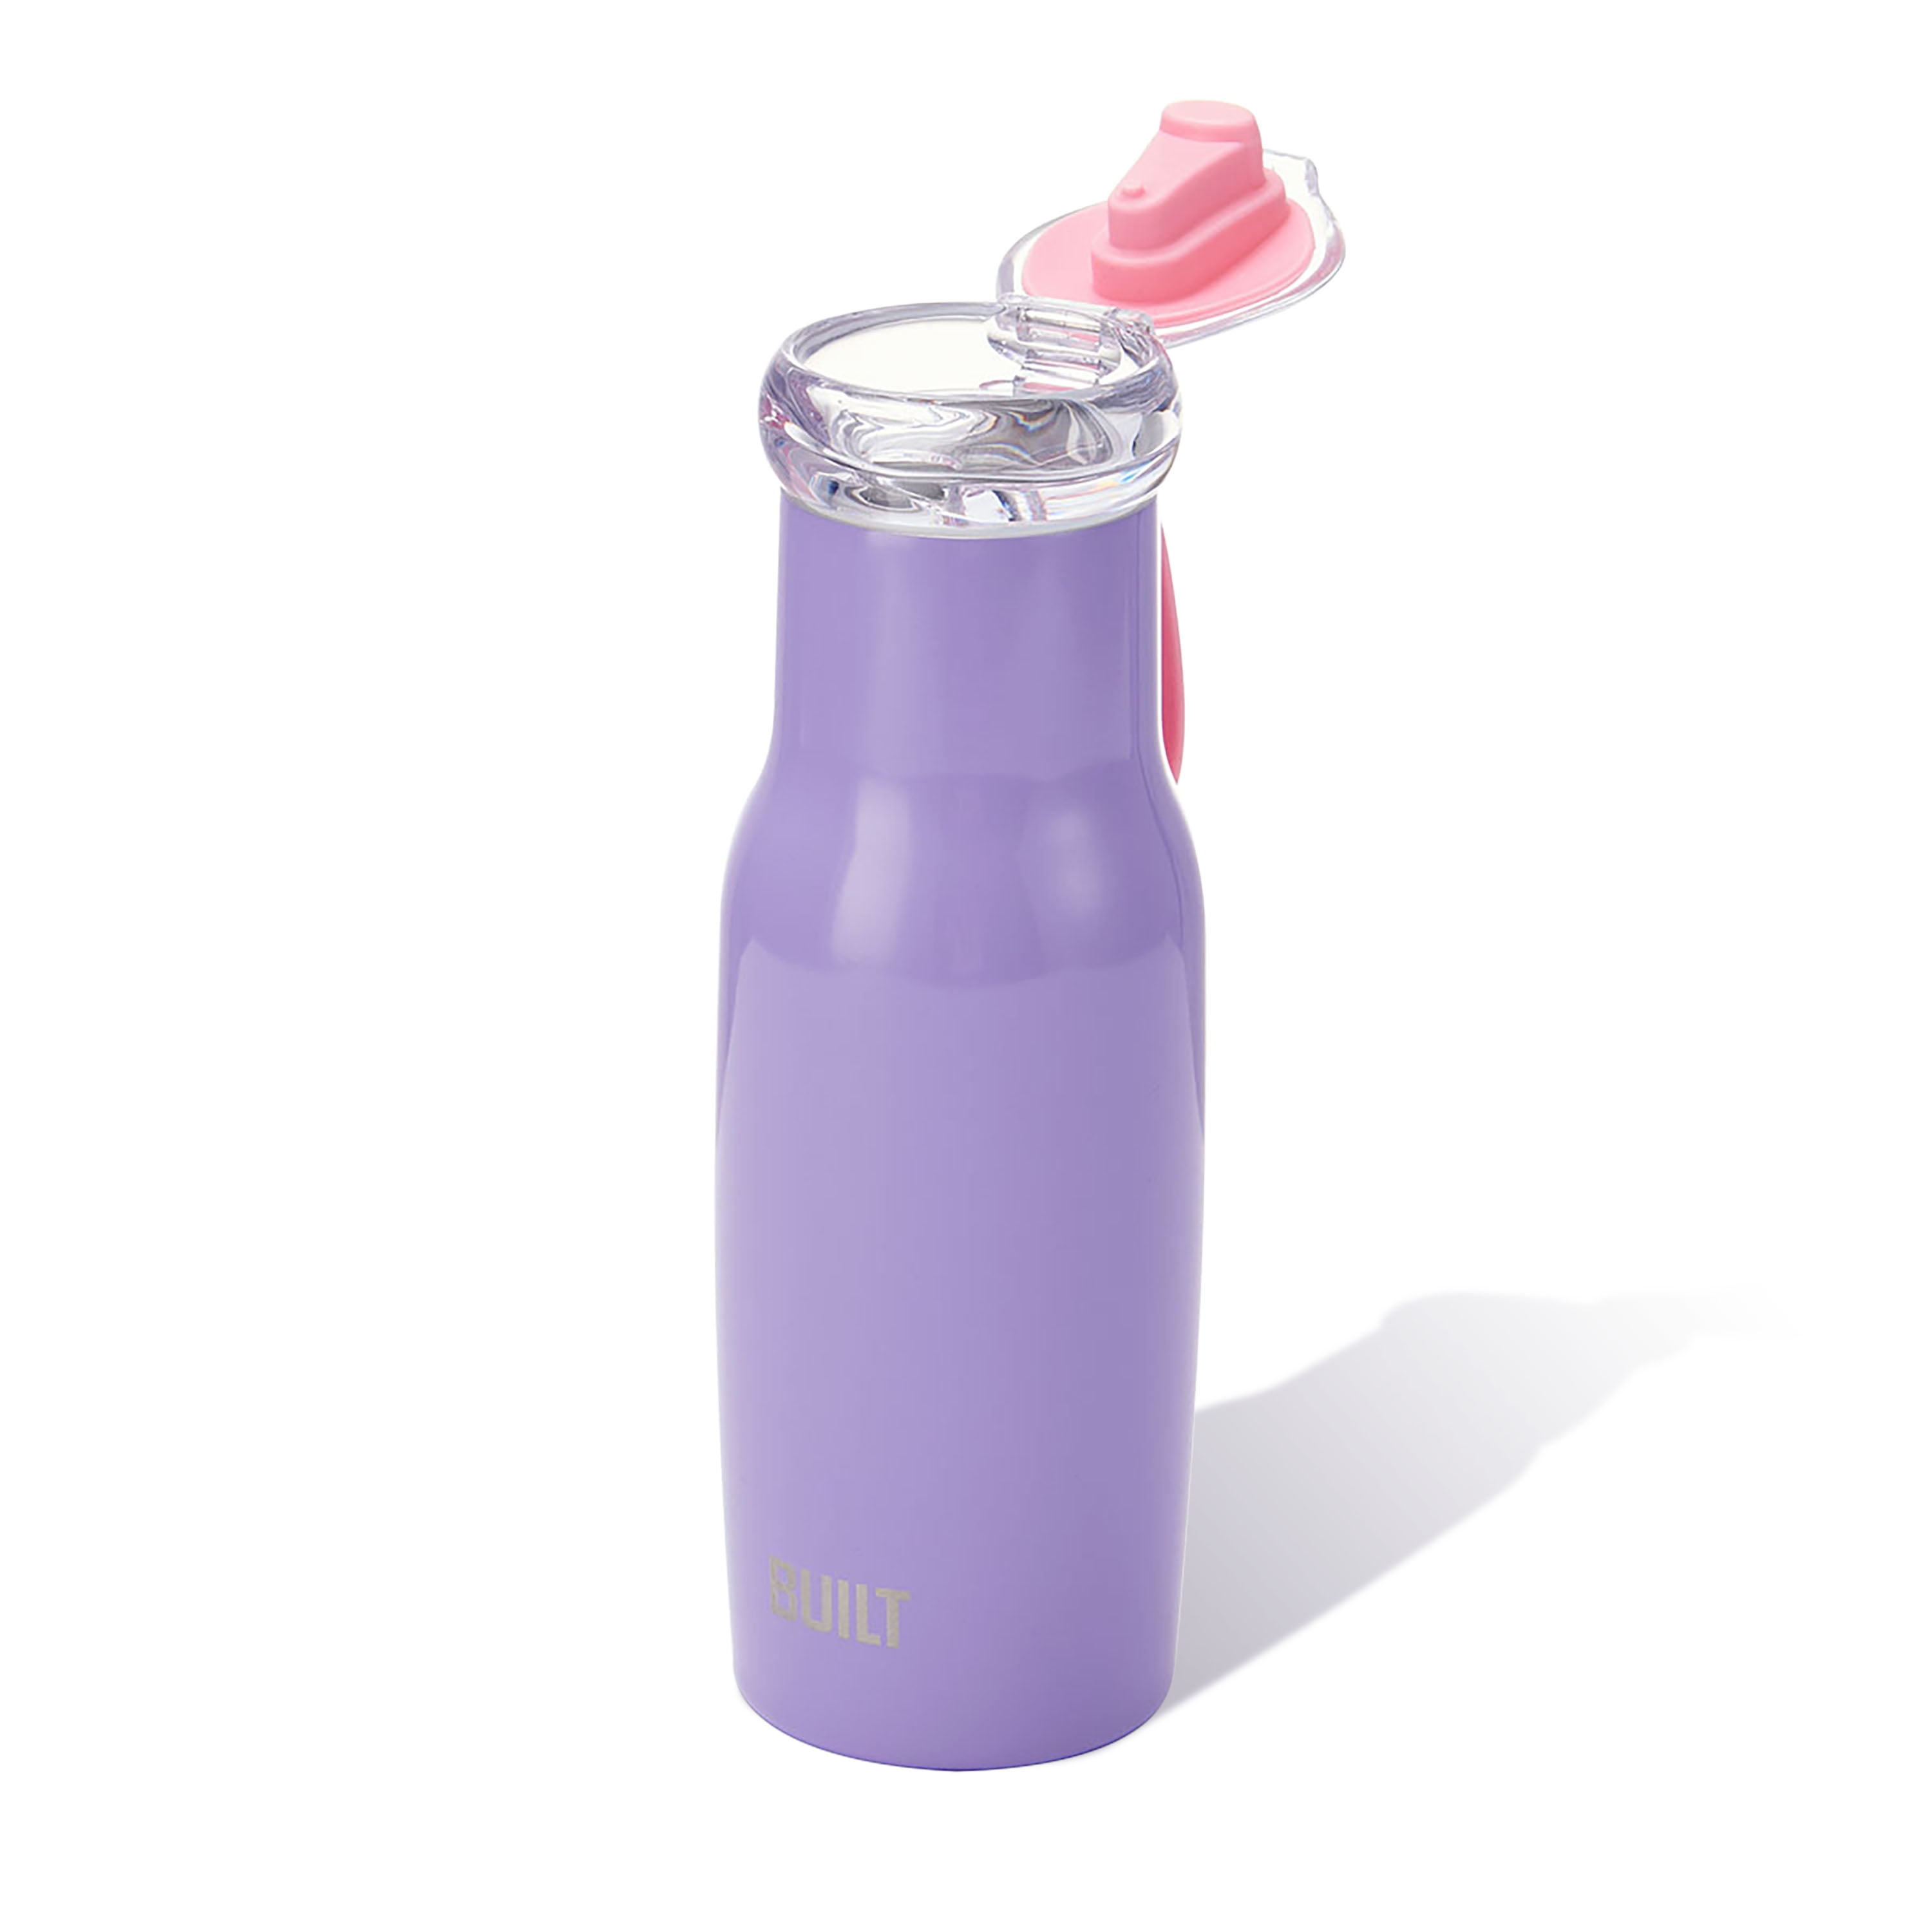 Just 14 Water Bottles That You'll Want To Own Immediately